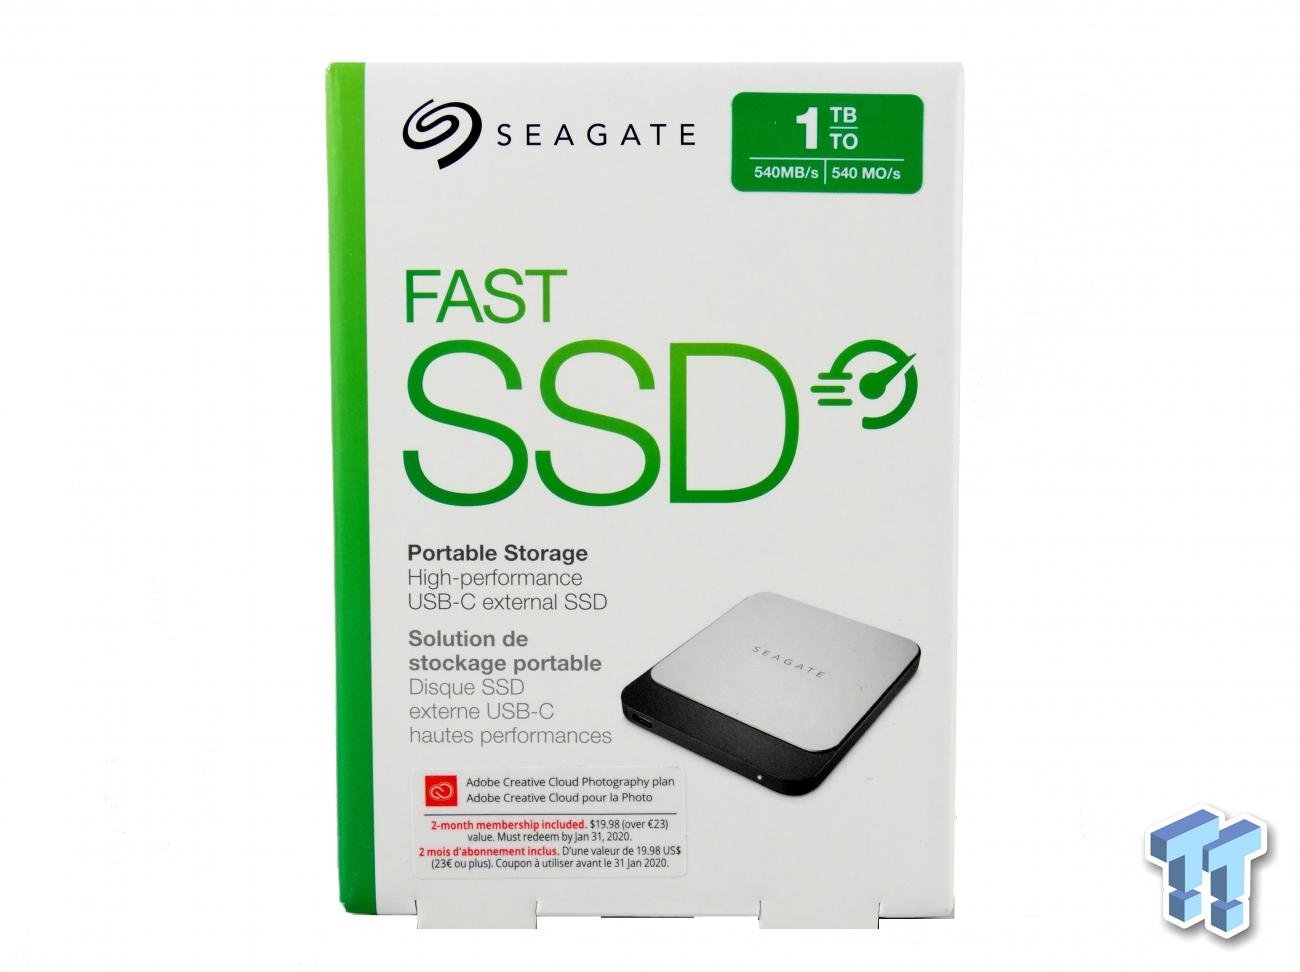 Seagate Fast SSD Review - Light 